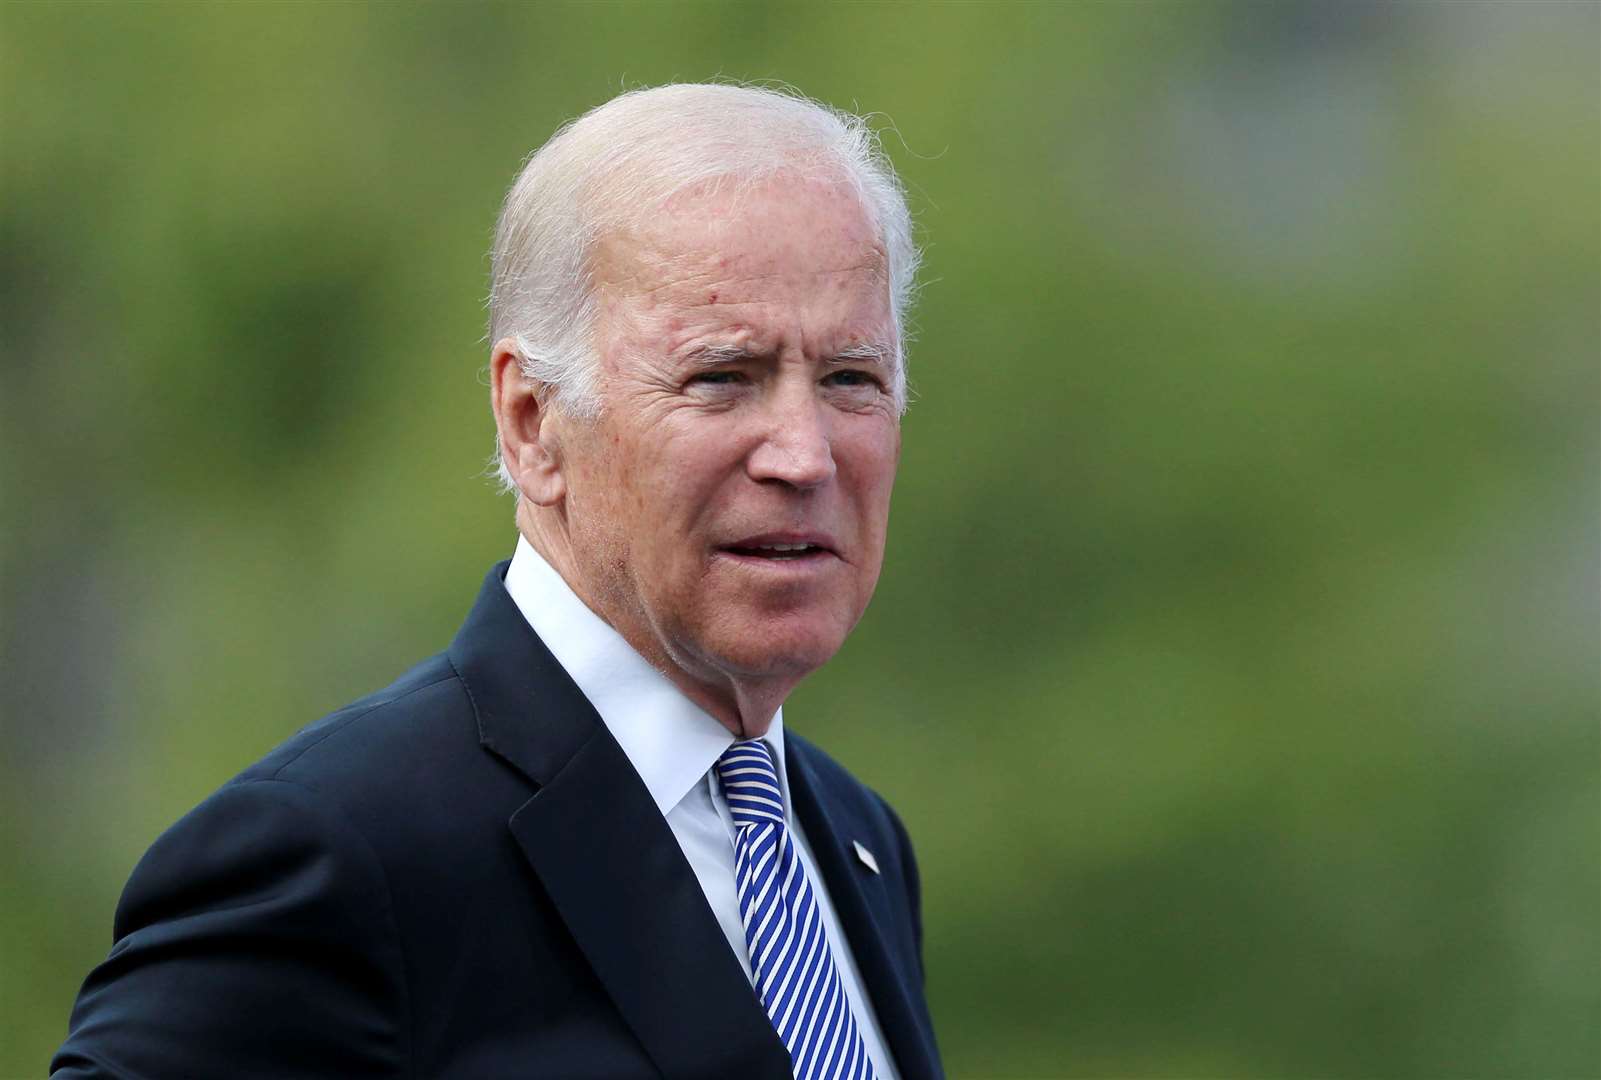 Joe Biden said any US-UK trade deal must be contingent upon respect for the Good Friday Agreement (Niall Carson/PA)